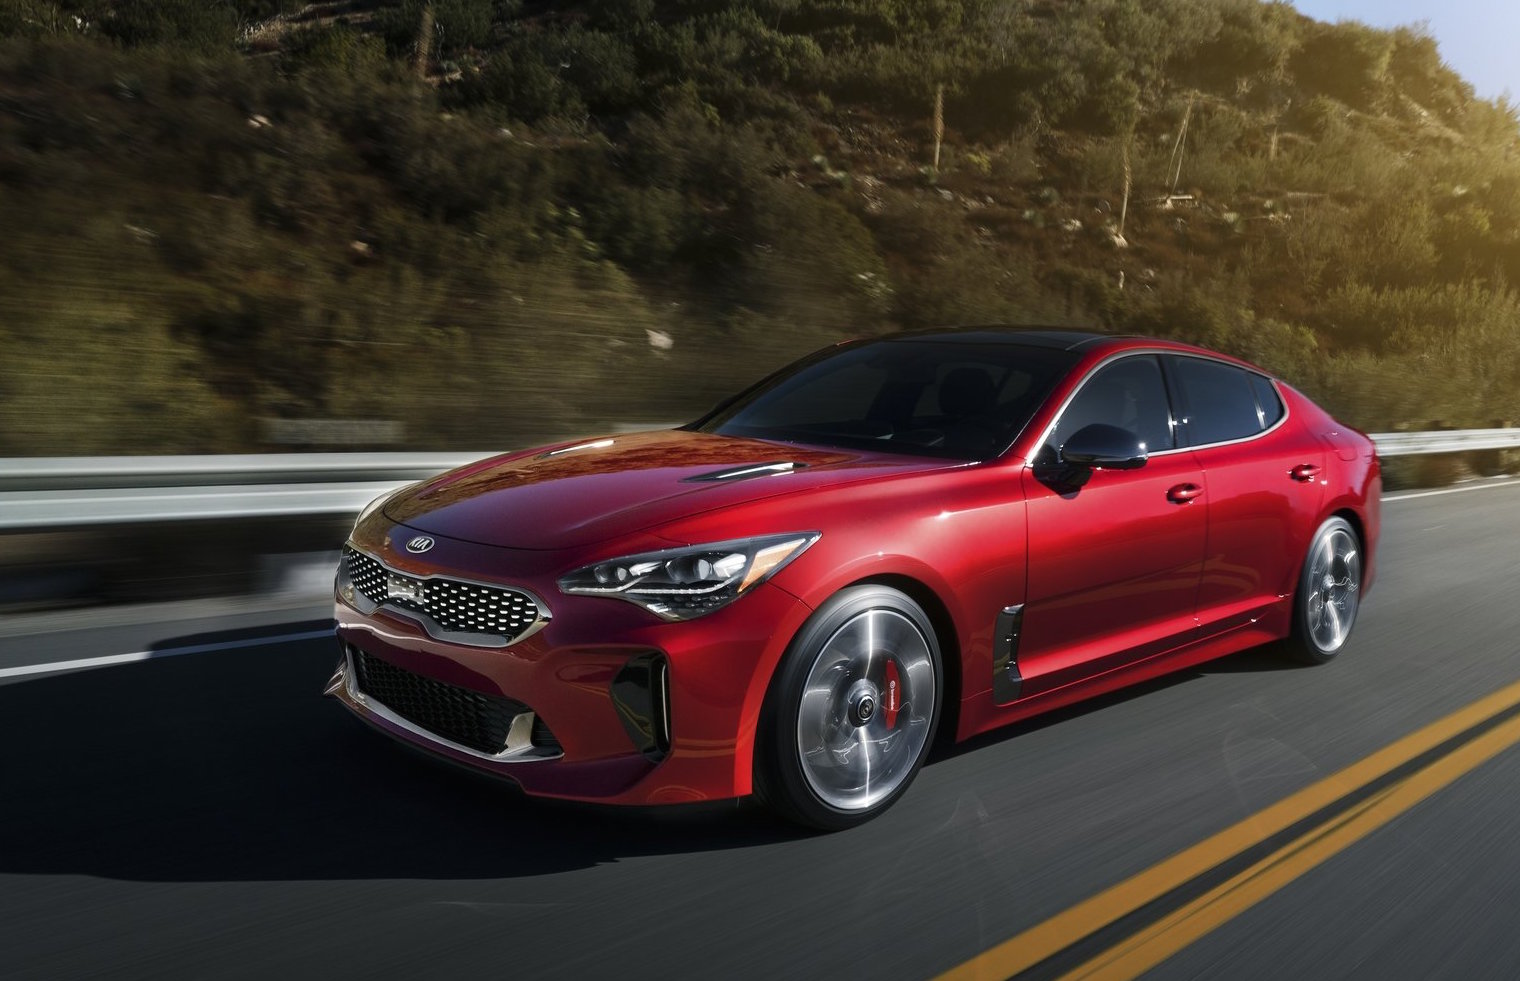 Kia working on ever faster Stinger – report